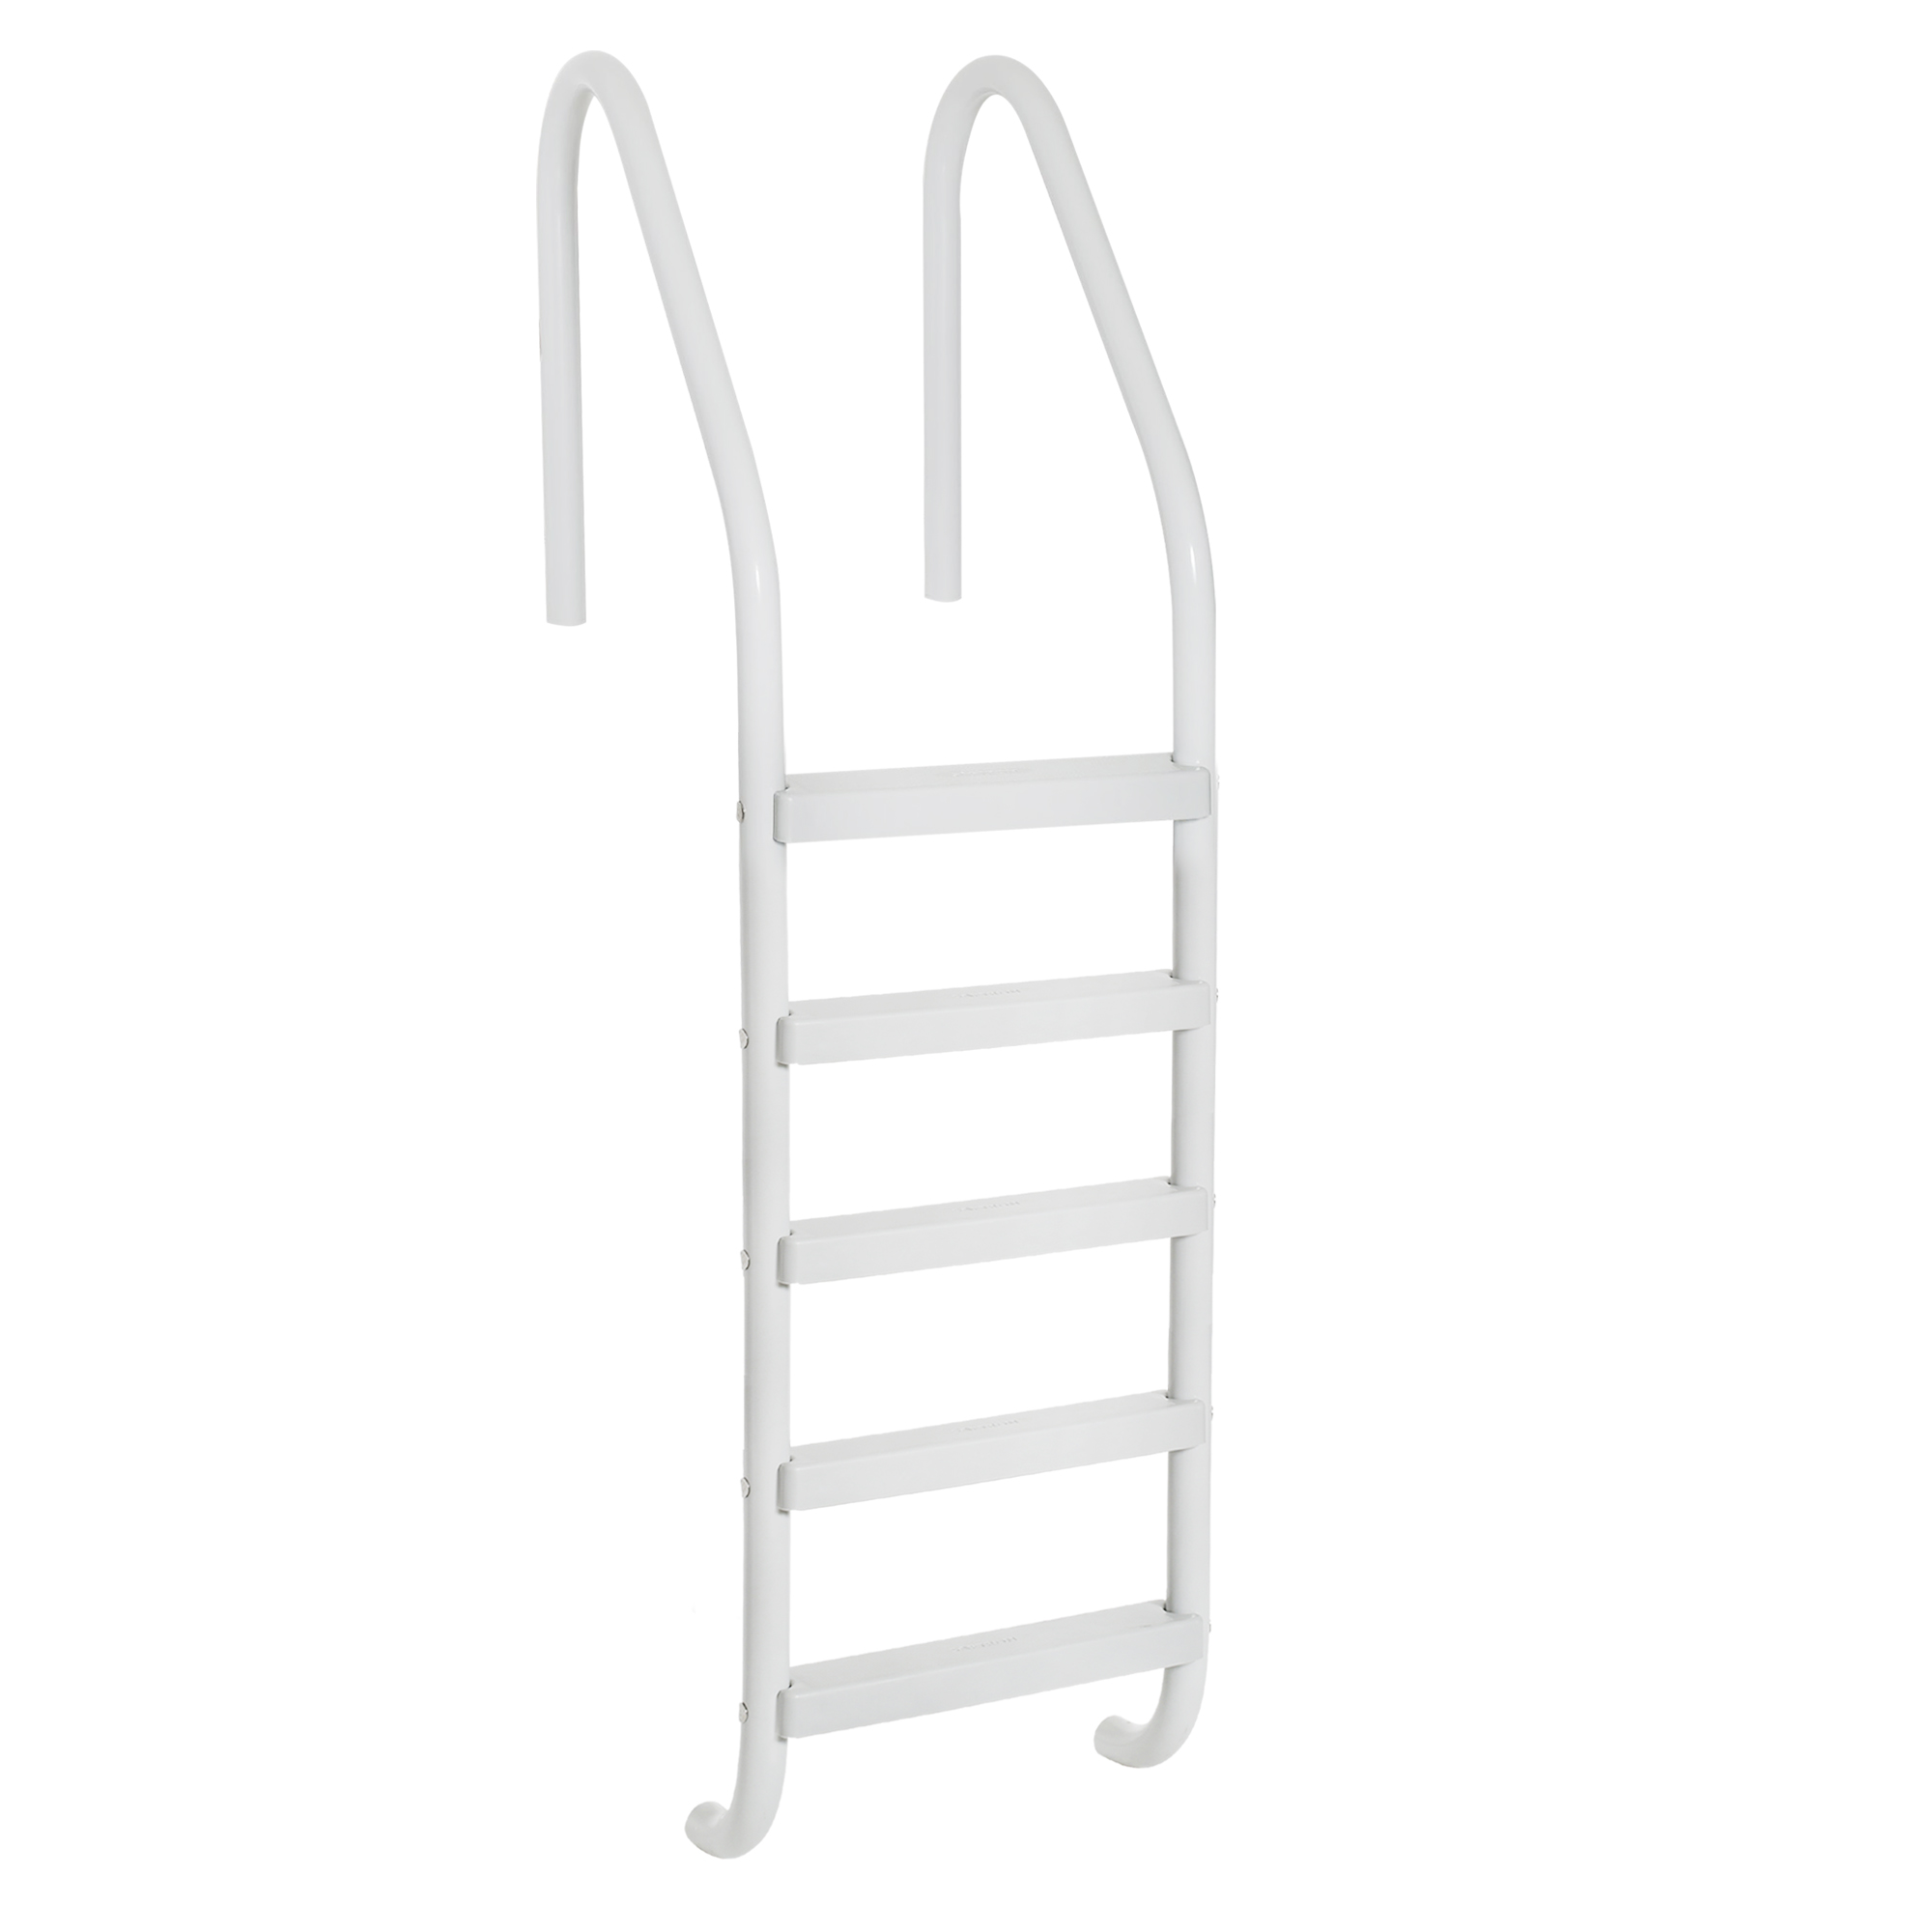 5 Step High Impact Polymer In-Ground Pool Ladder - White